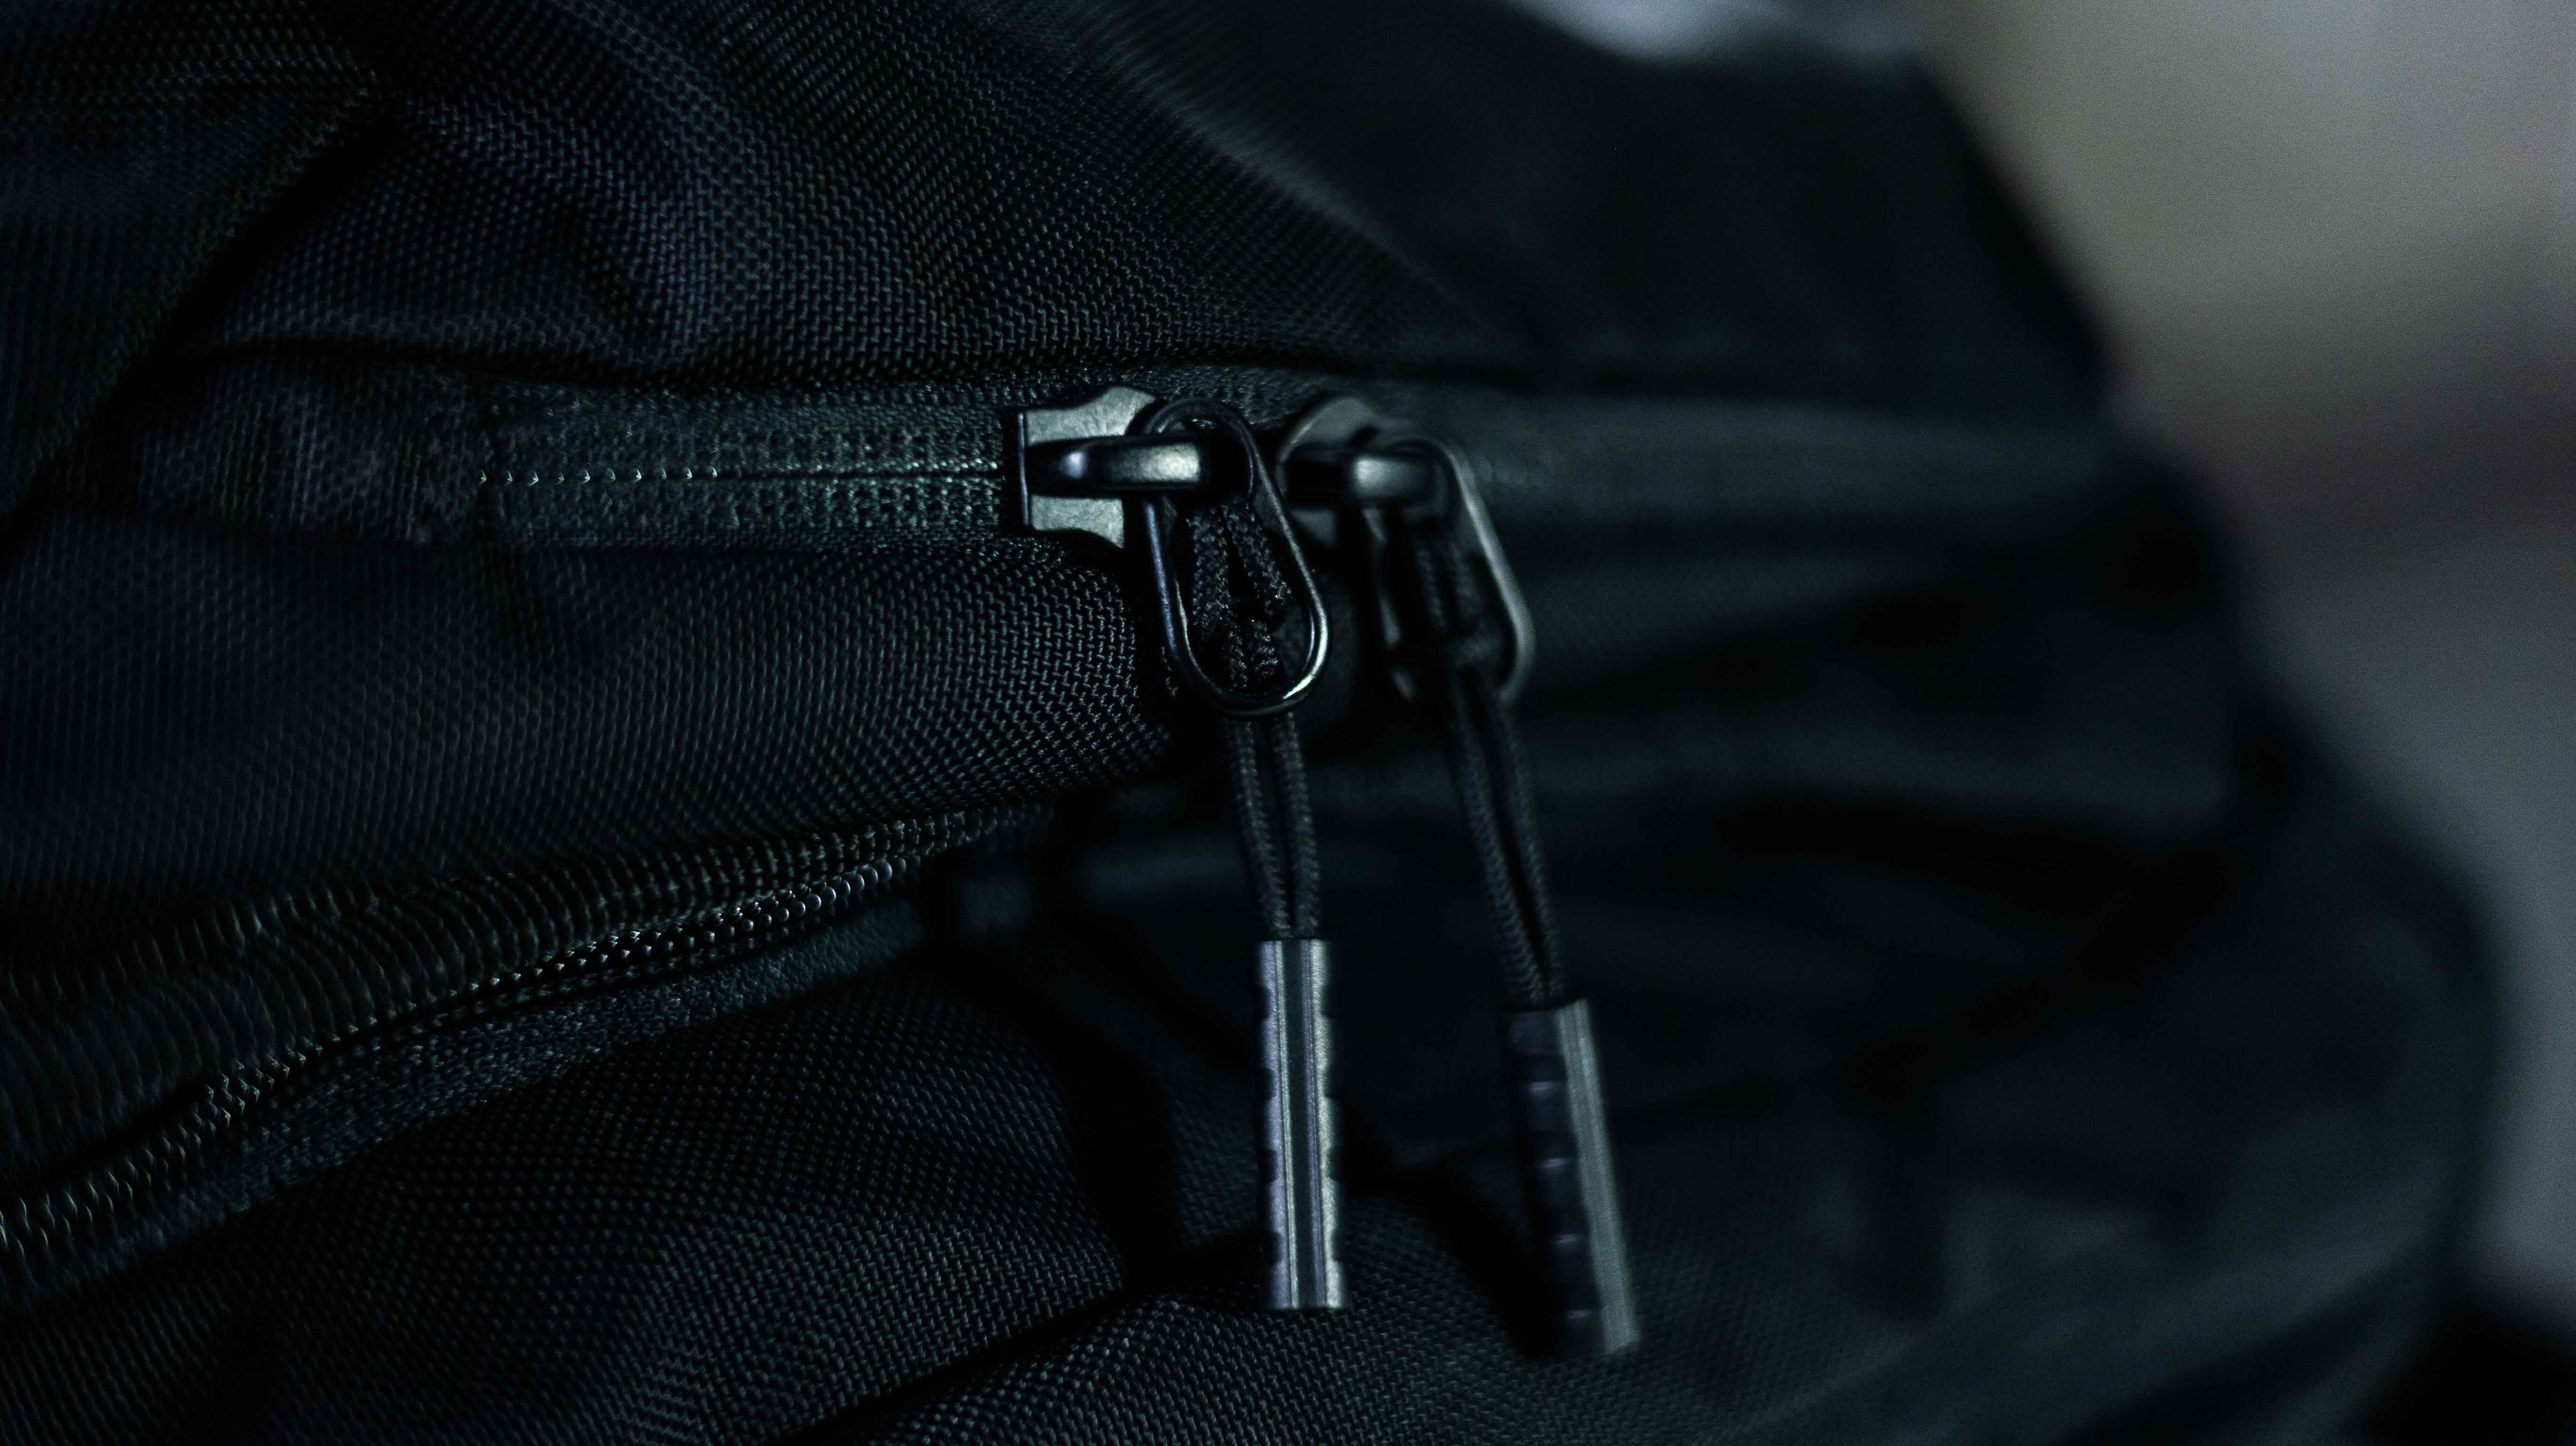 5.11 Tactical - +++ NEW IN +++ Meet the LV18! This 30L bag features 5.11's  signature CenterLine™ design and was named best bag of SHOT Show 2019 by  Everydaycarry.com The main compartment